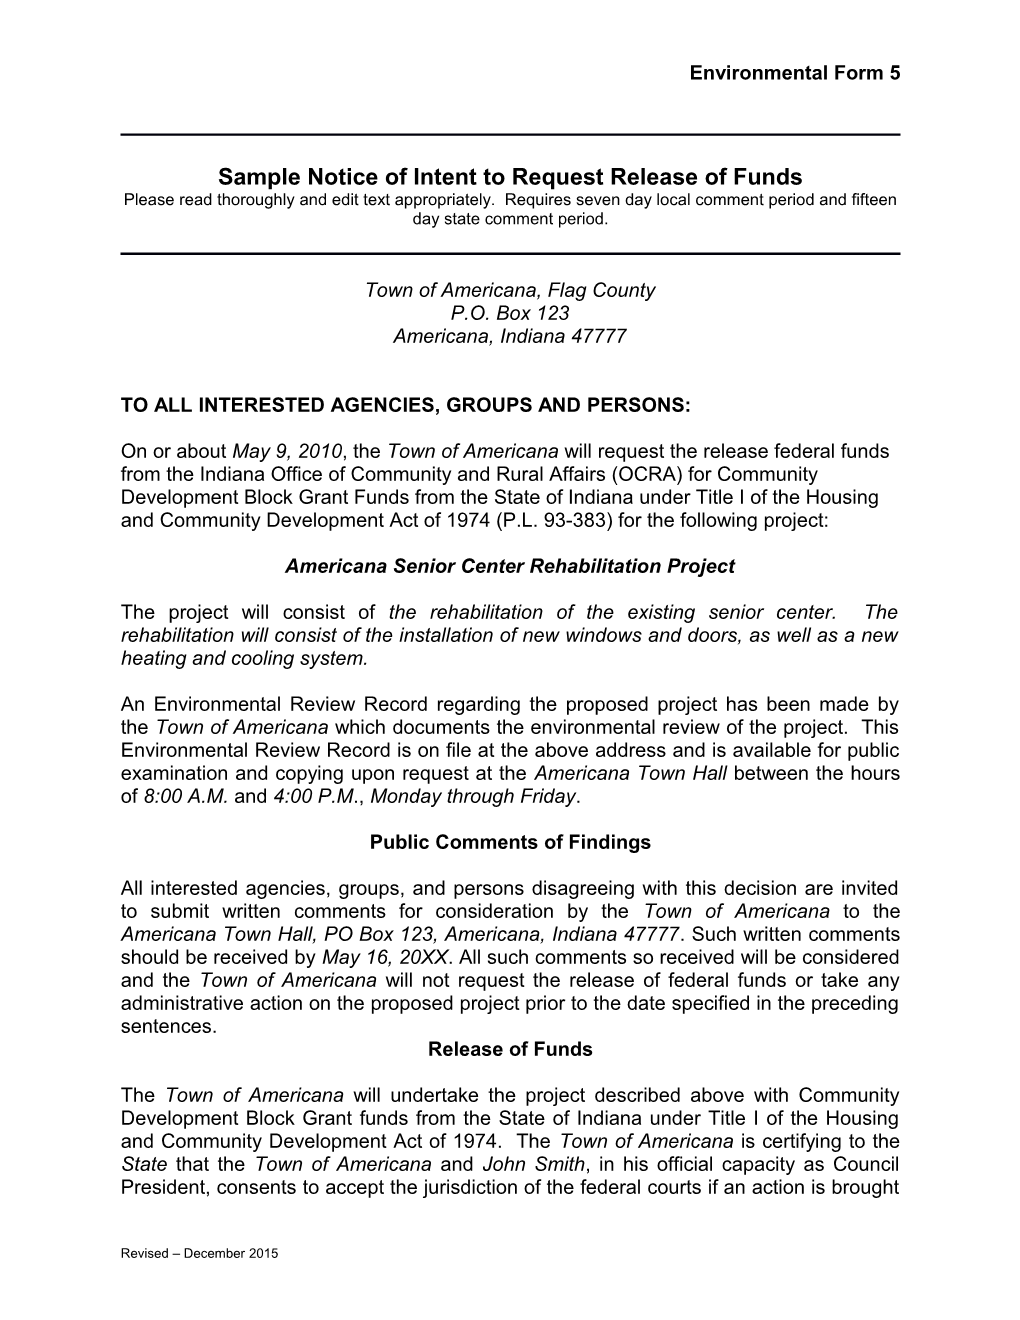 Sample Notice of Intent to Request Release of Funds